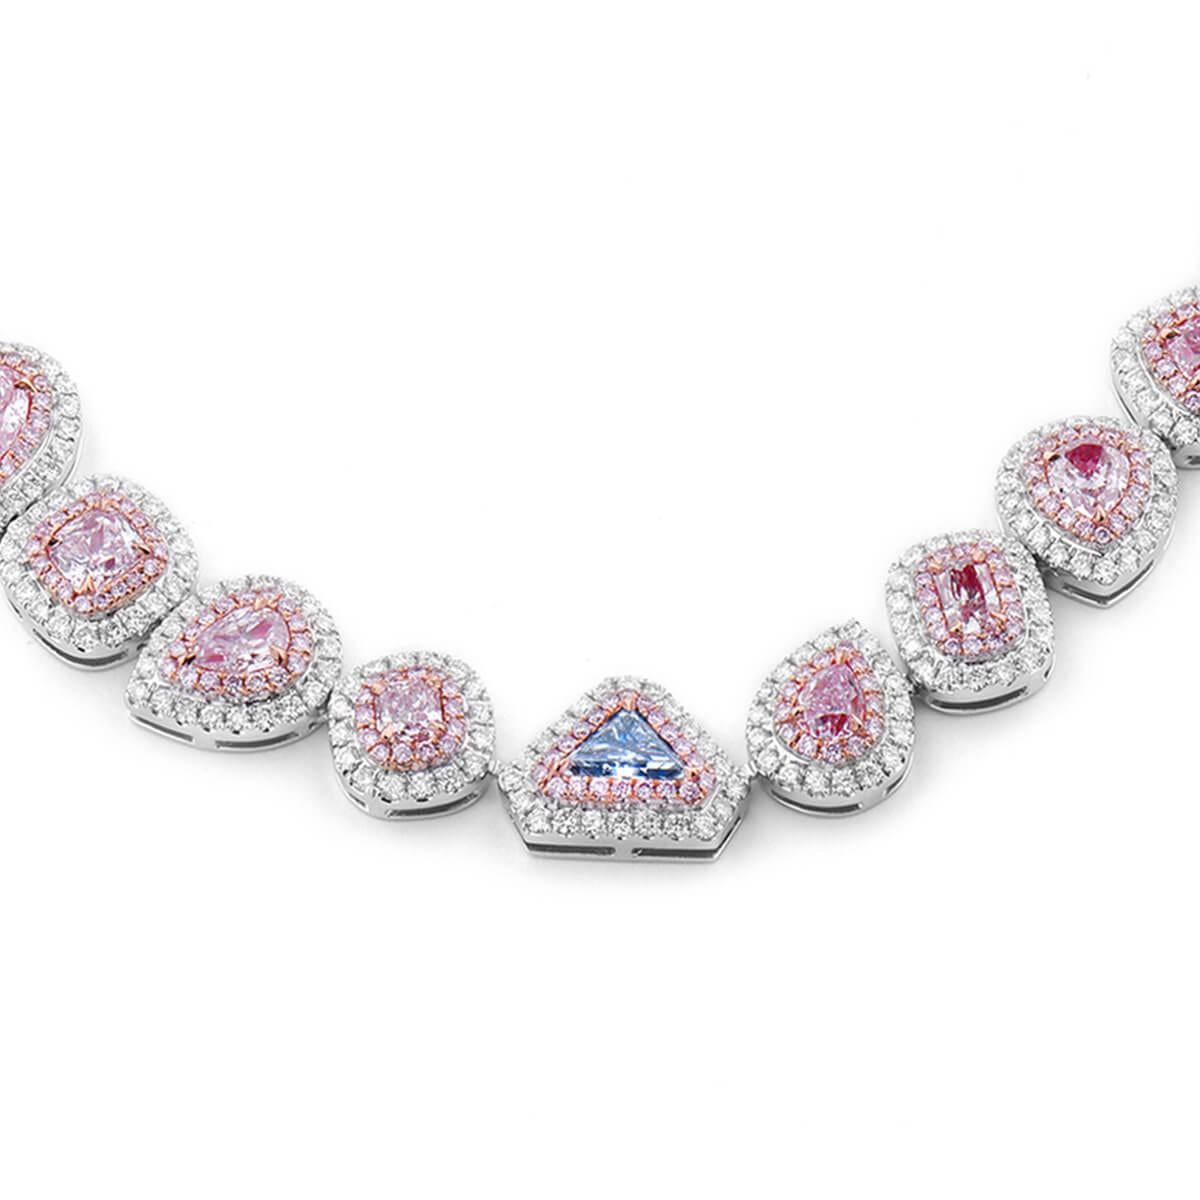 This Magnificent Piece is made from Natural, untreated Pink, White and Blue Diamonds. 
The majority of the Necklace is made up of Fancy Light Purplish Pink Diamonds. 
It hosts one blue diamond, blue diamonds being one of the rarest and most valuable